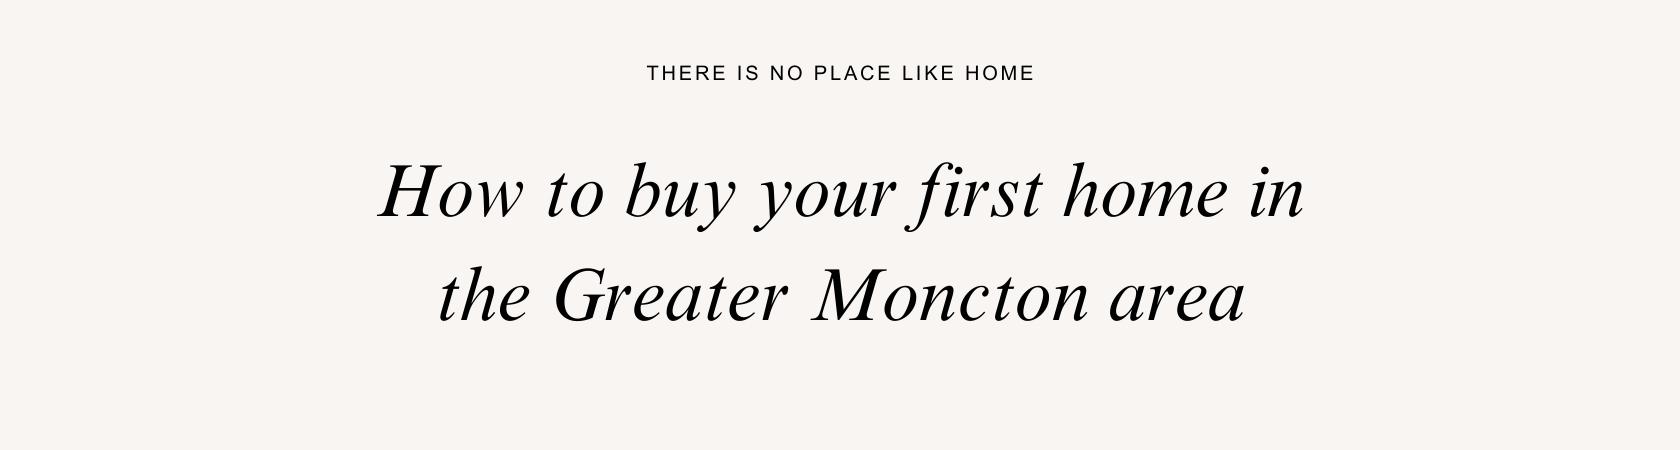 How to buy your first home in the Greater Moncton Area